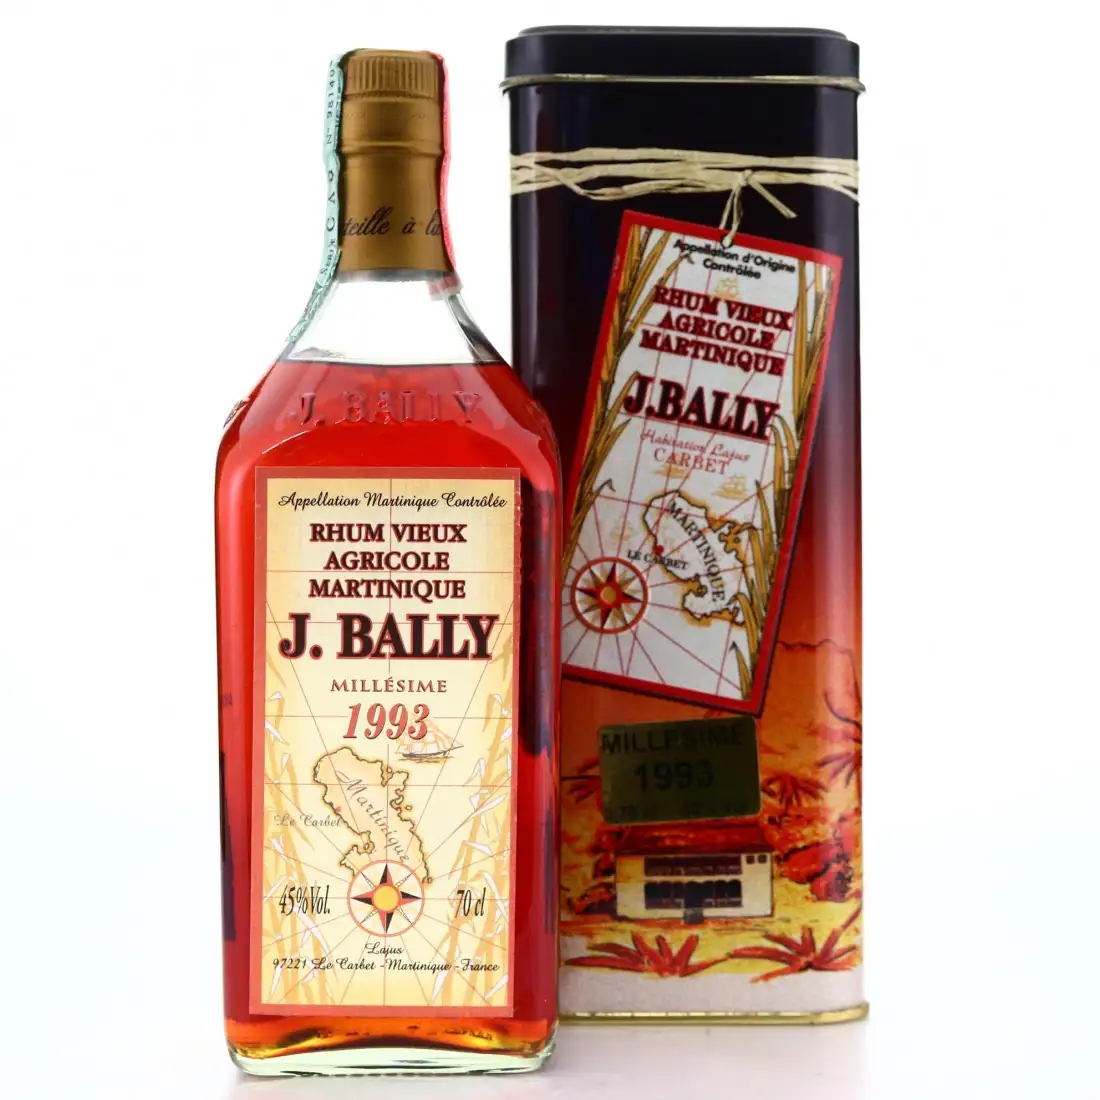 Image of the front of the bottle of the rum J. Bally Rhum Vieux Millésime 1993